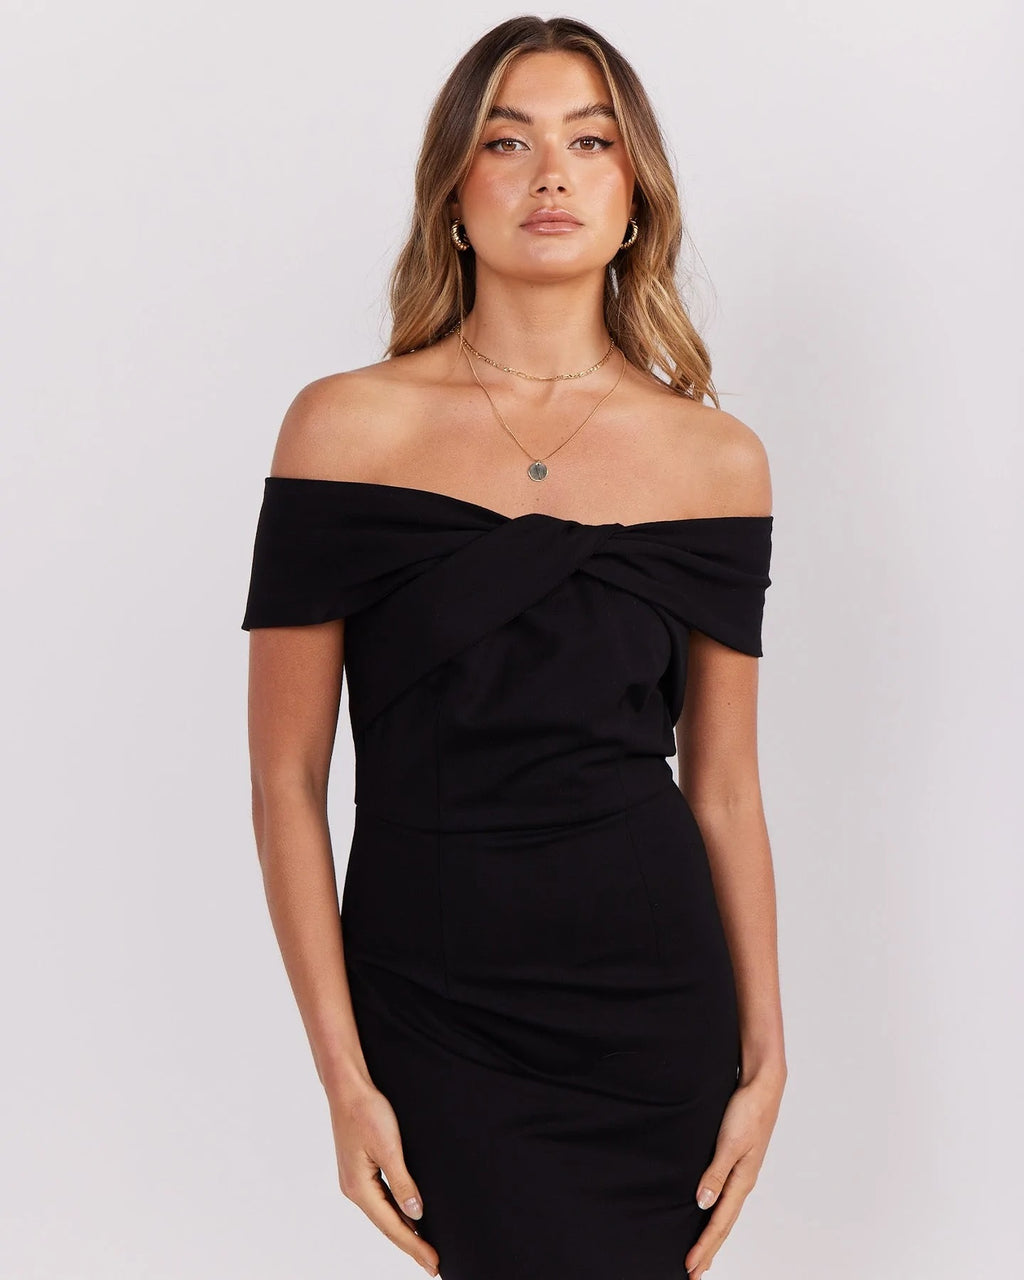 Ariana Dress by Twosisters - Black